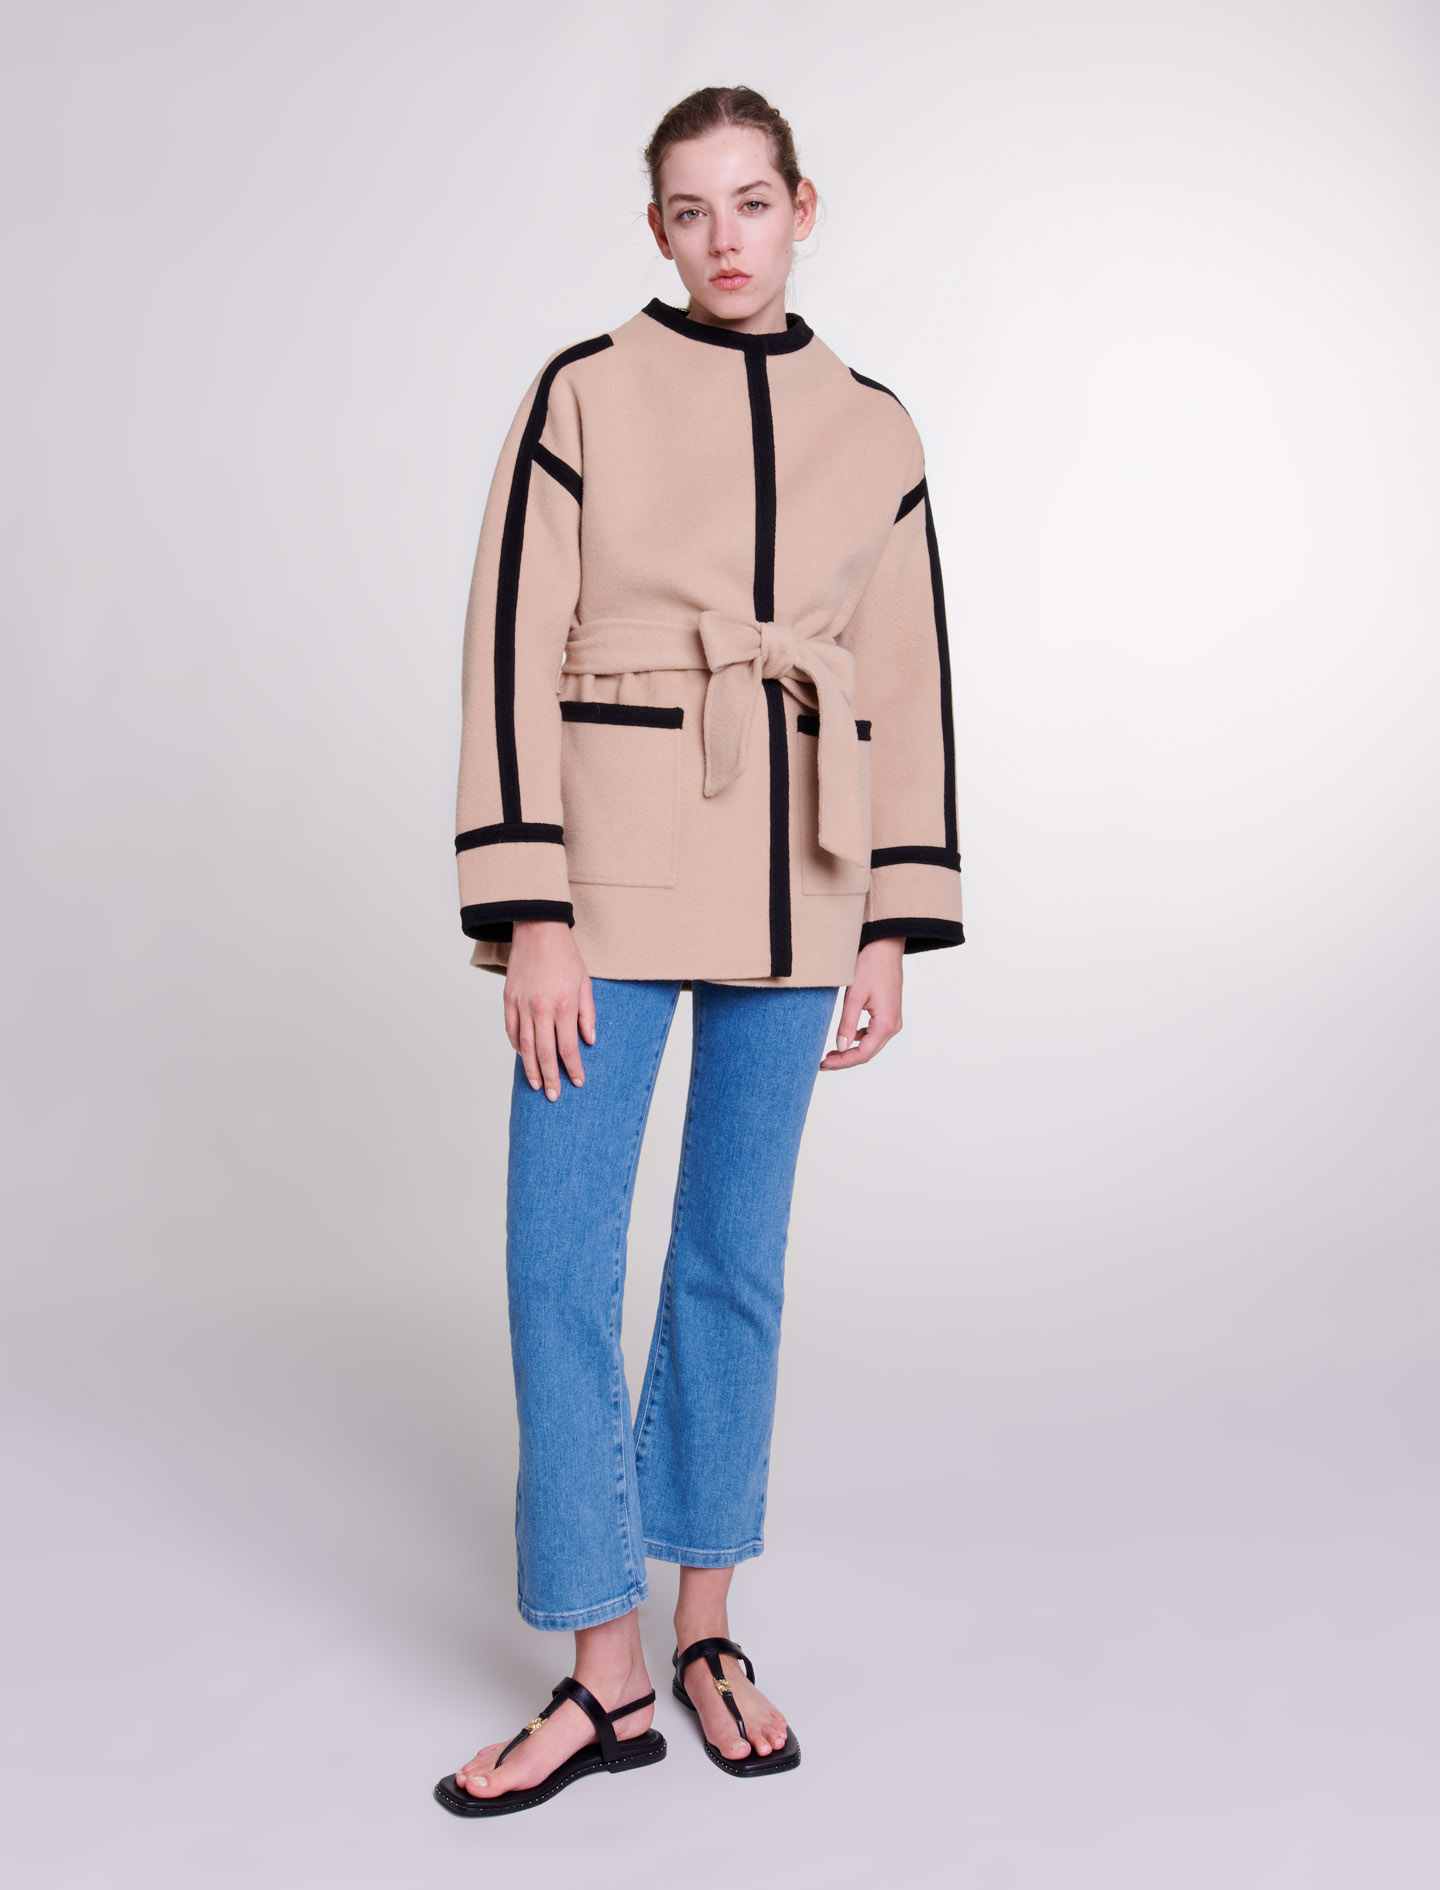 Maje Woman's wool, Short two-tone coat for Spring/Summer, in color Camel / Brown